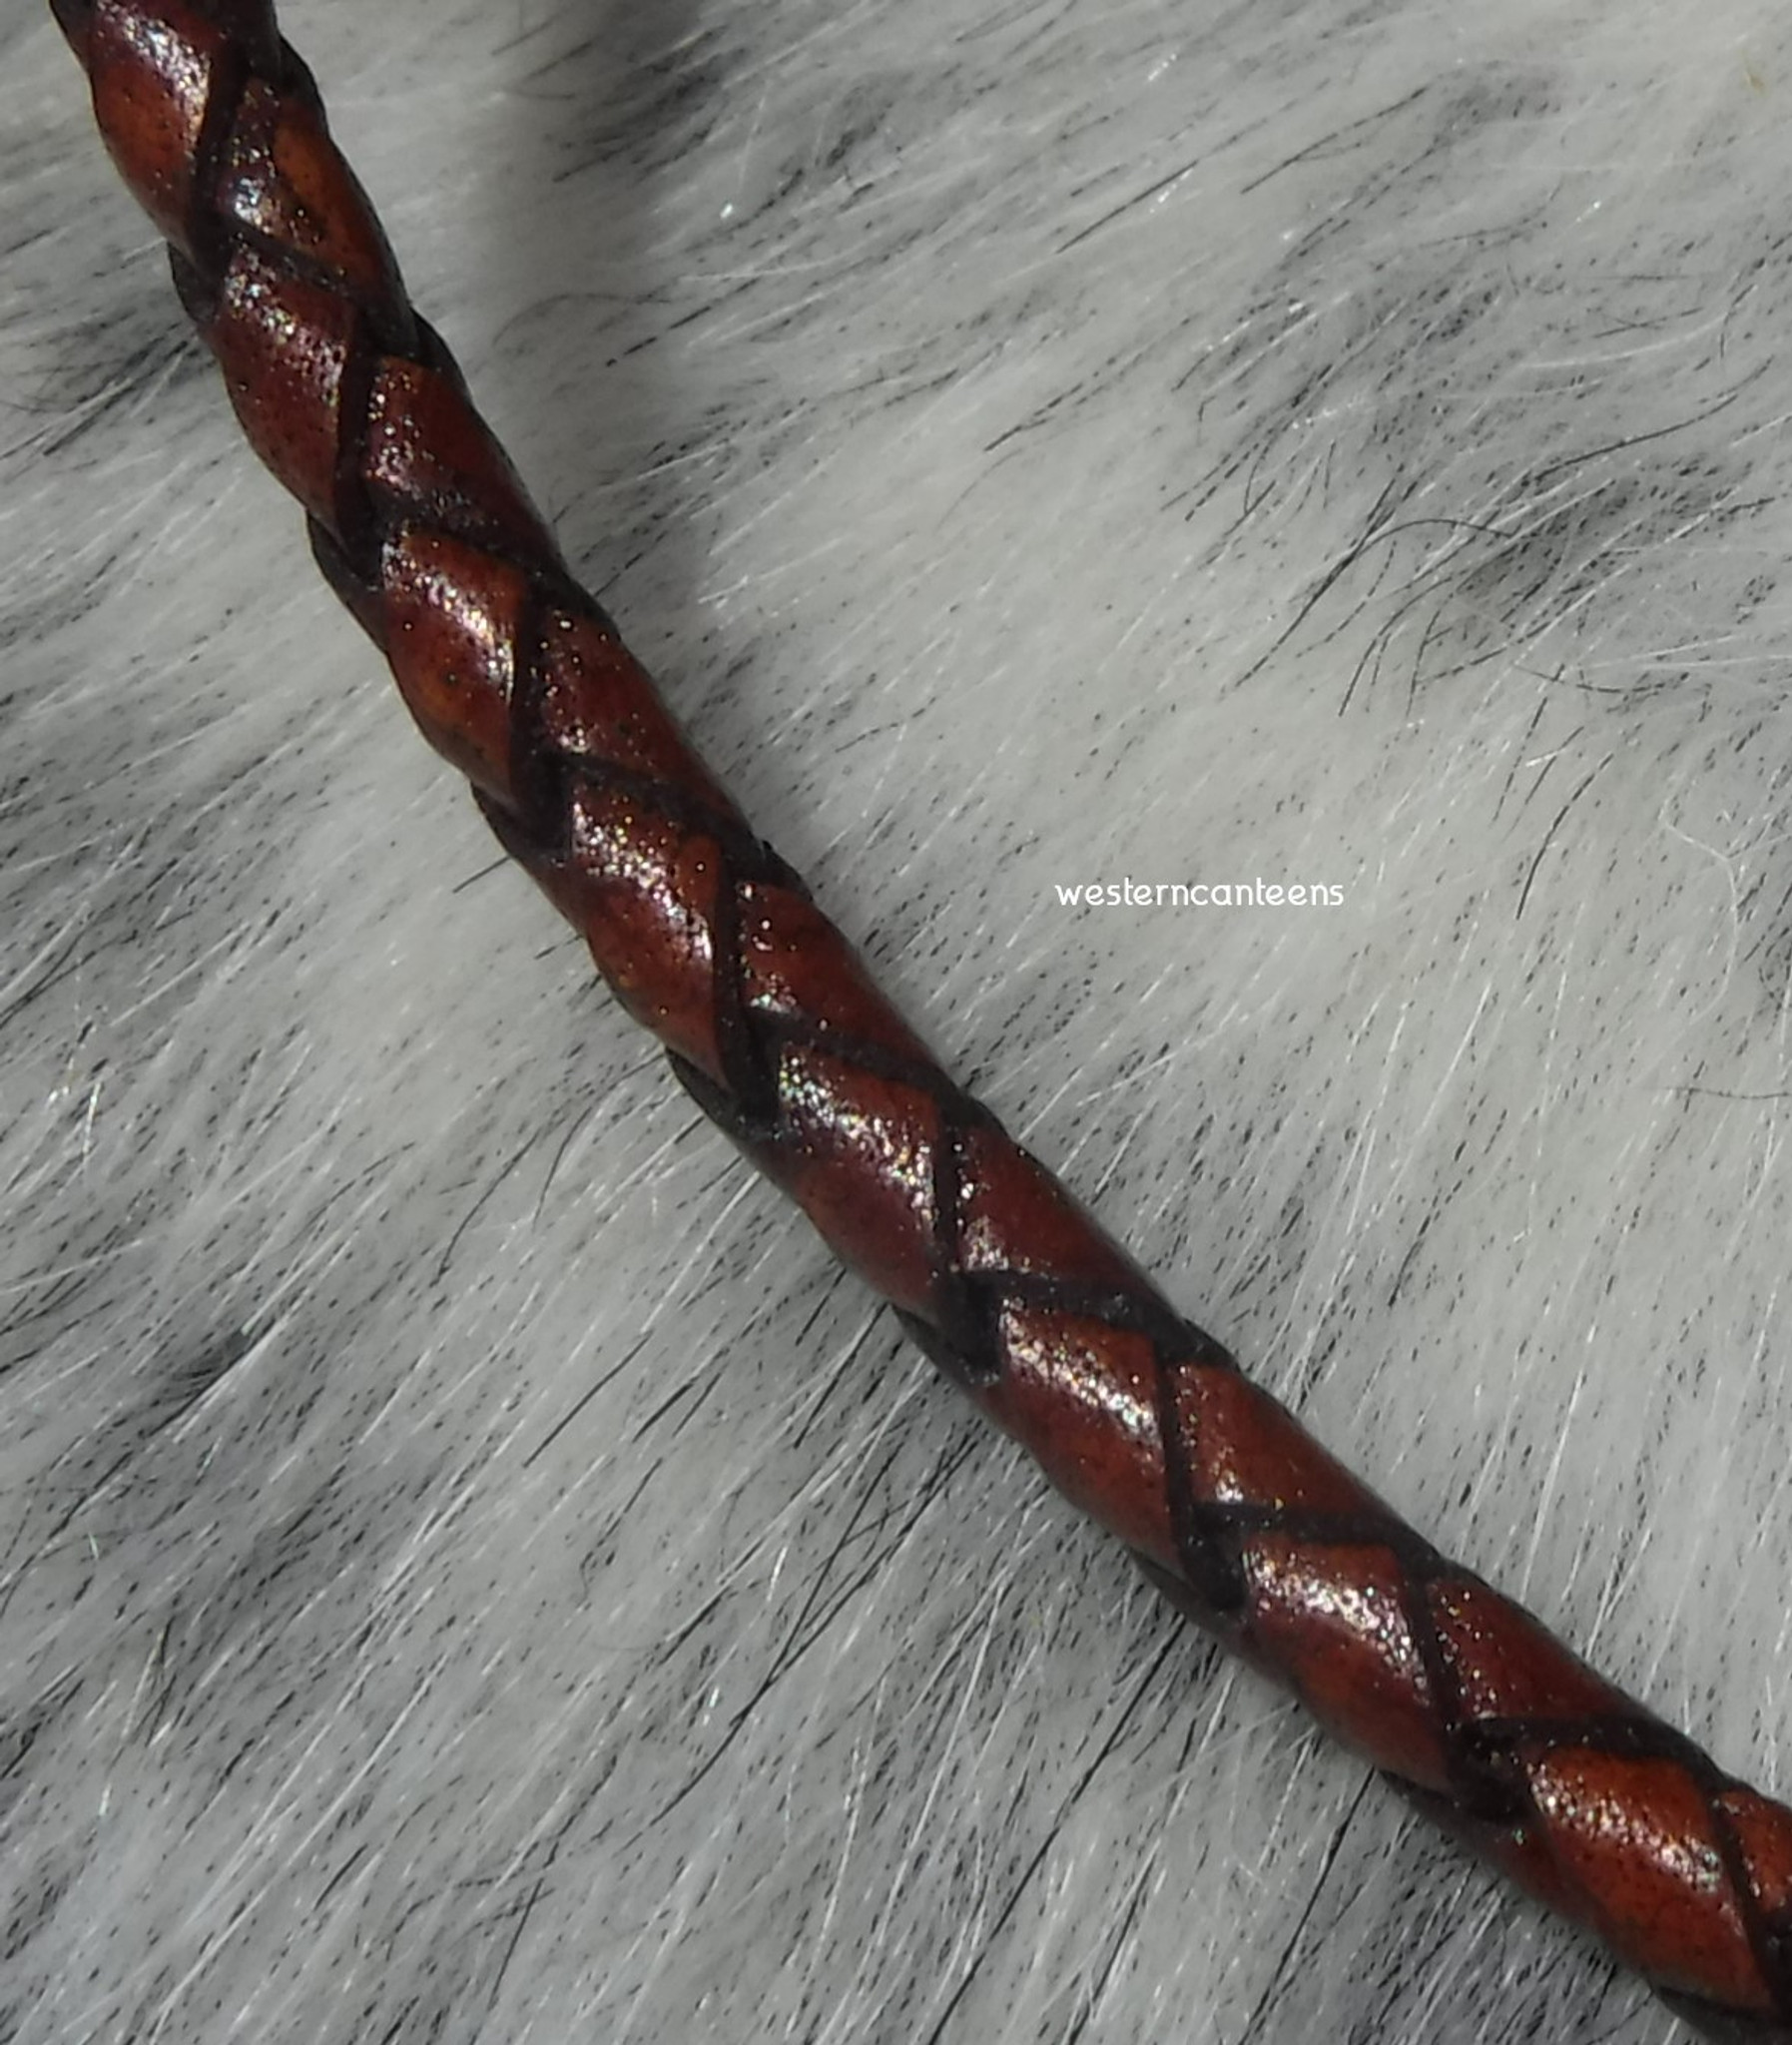 Antique Brown Square Braided Leather